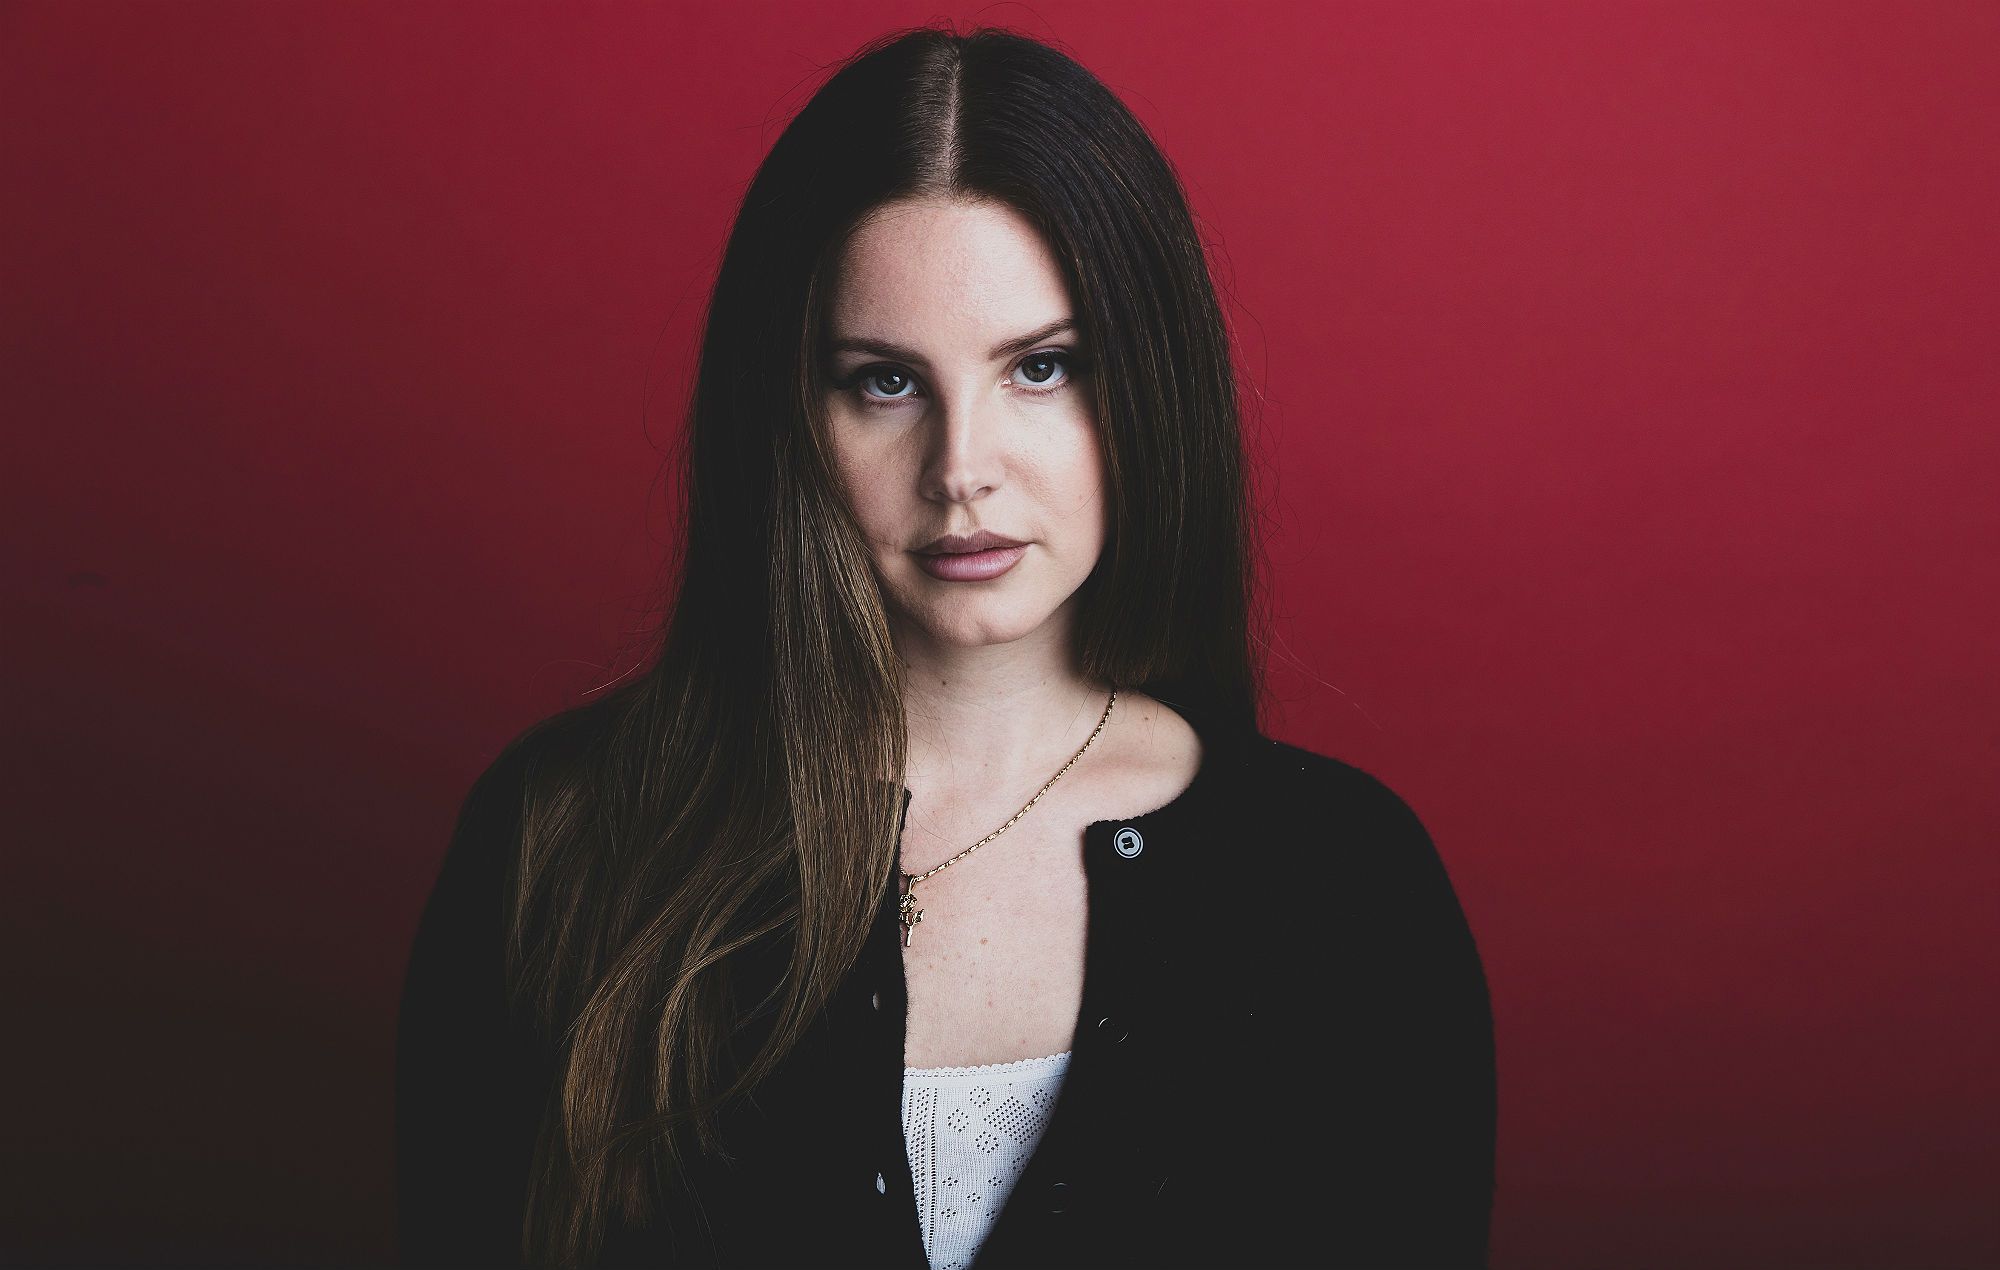 Lana Del Rey is looking for local artists to join her on tour